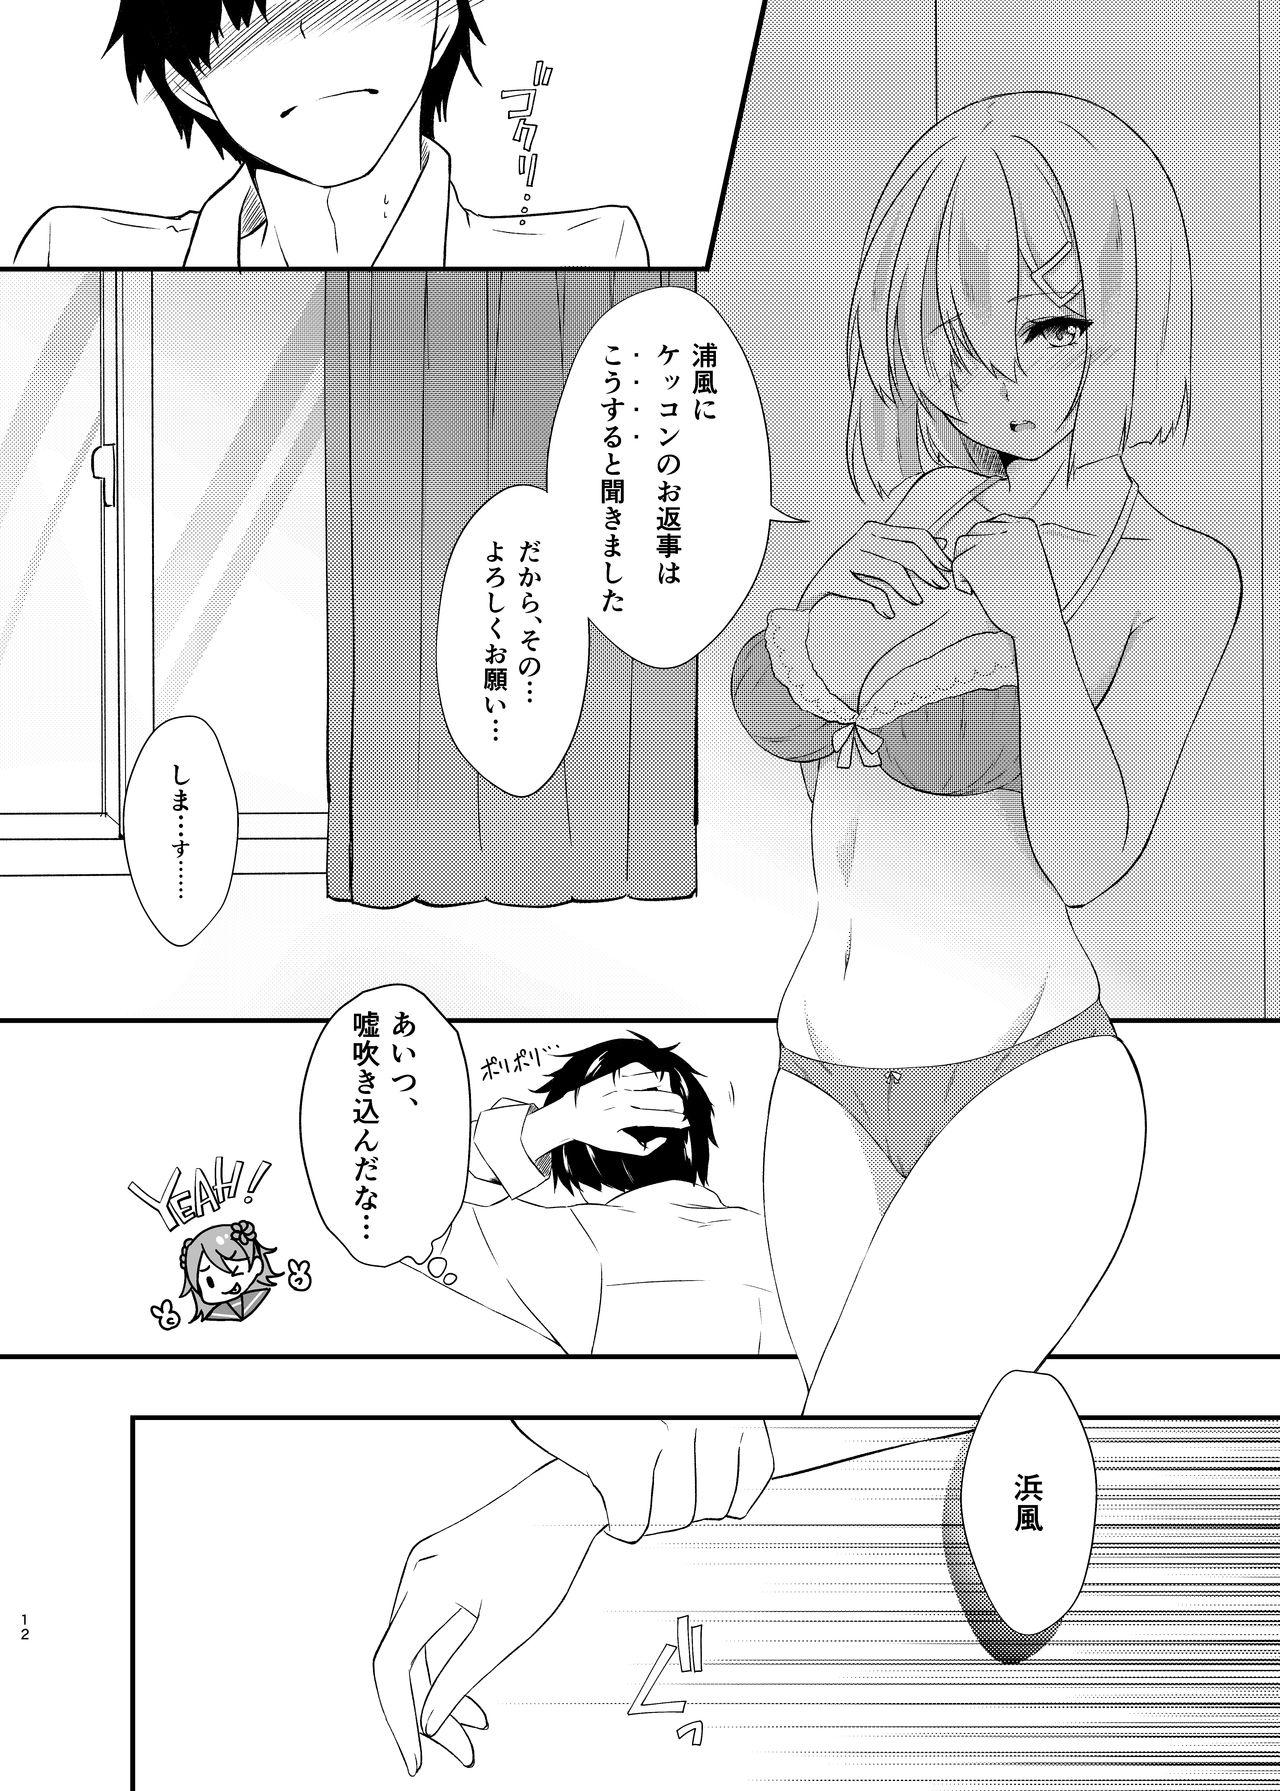 Bokep a happy ending - Kantai collection Hot Naked Women - Page 11